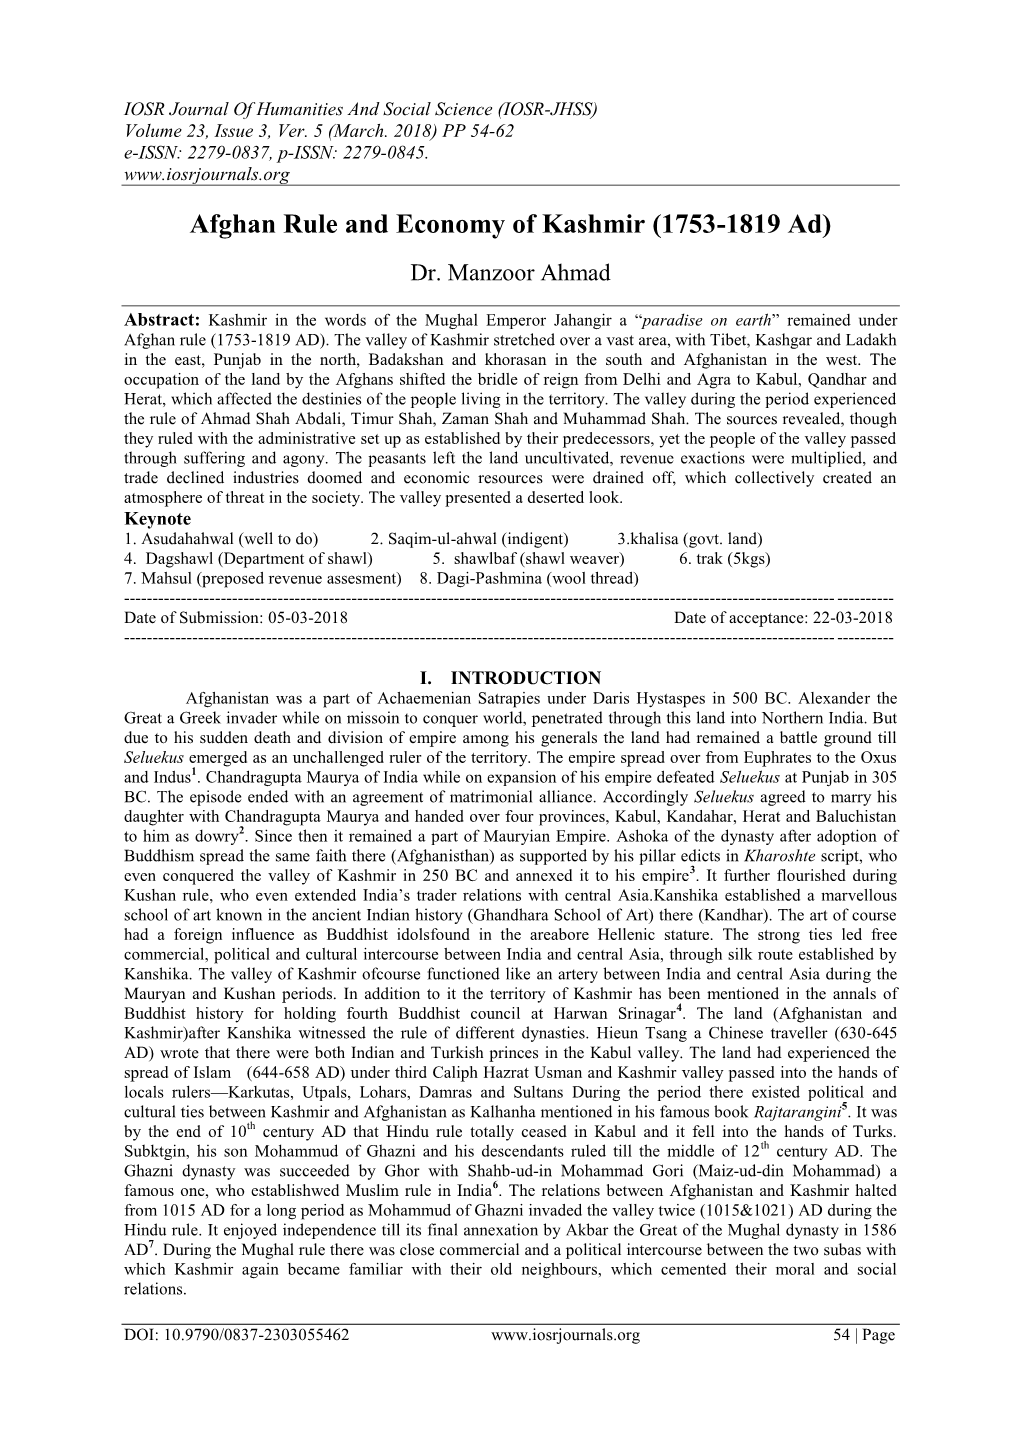 Afghan Rule and Economy of Kashmir (1753-1819 Ad)